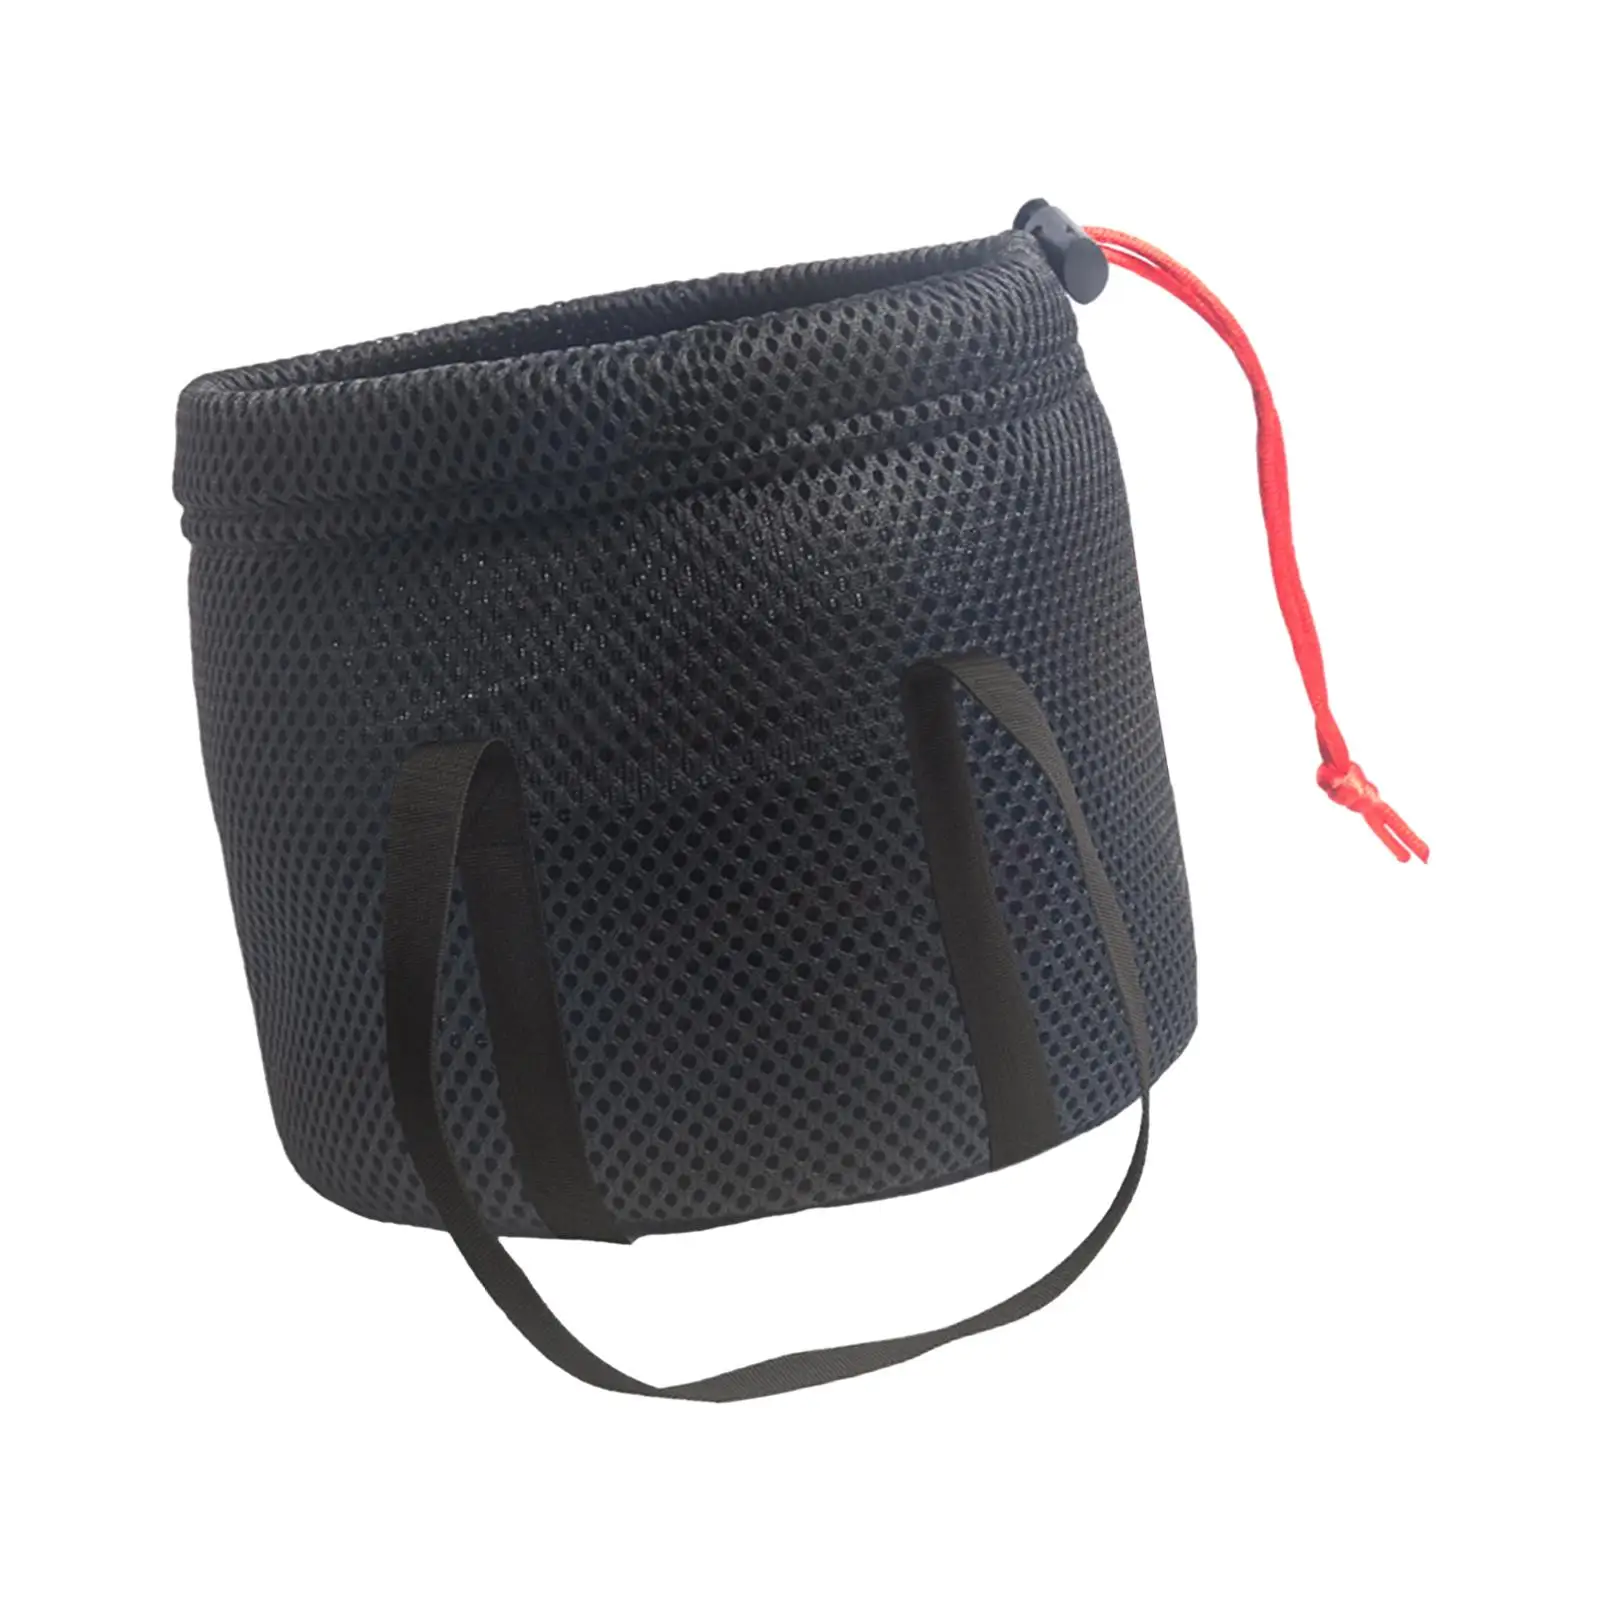 Camping Pot Storage Bag Drawstring Durable Black Protective Thickening Utensil Carrying Bag for Camp Supplies Beach Fishing BBQ